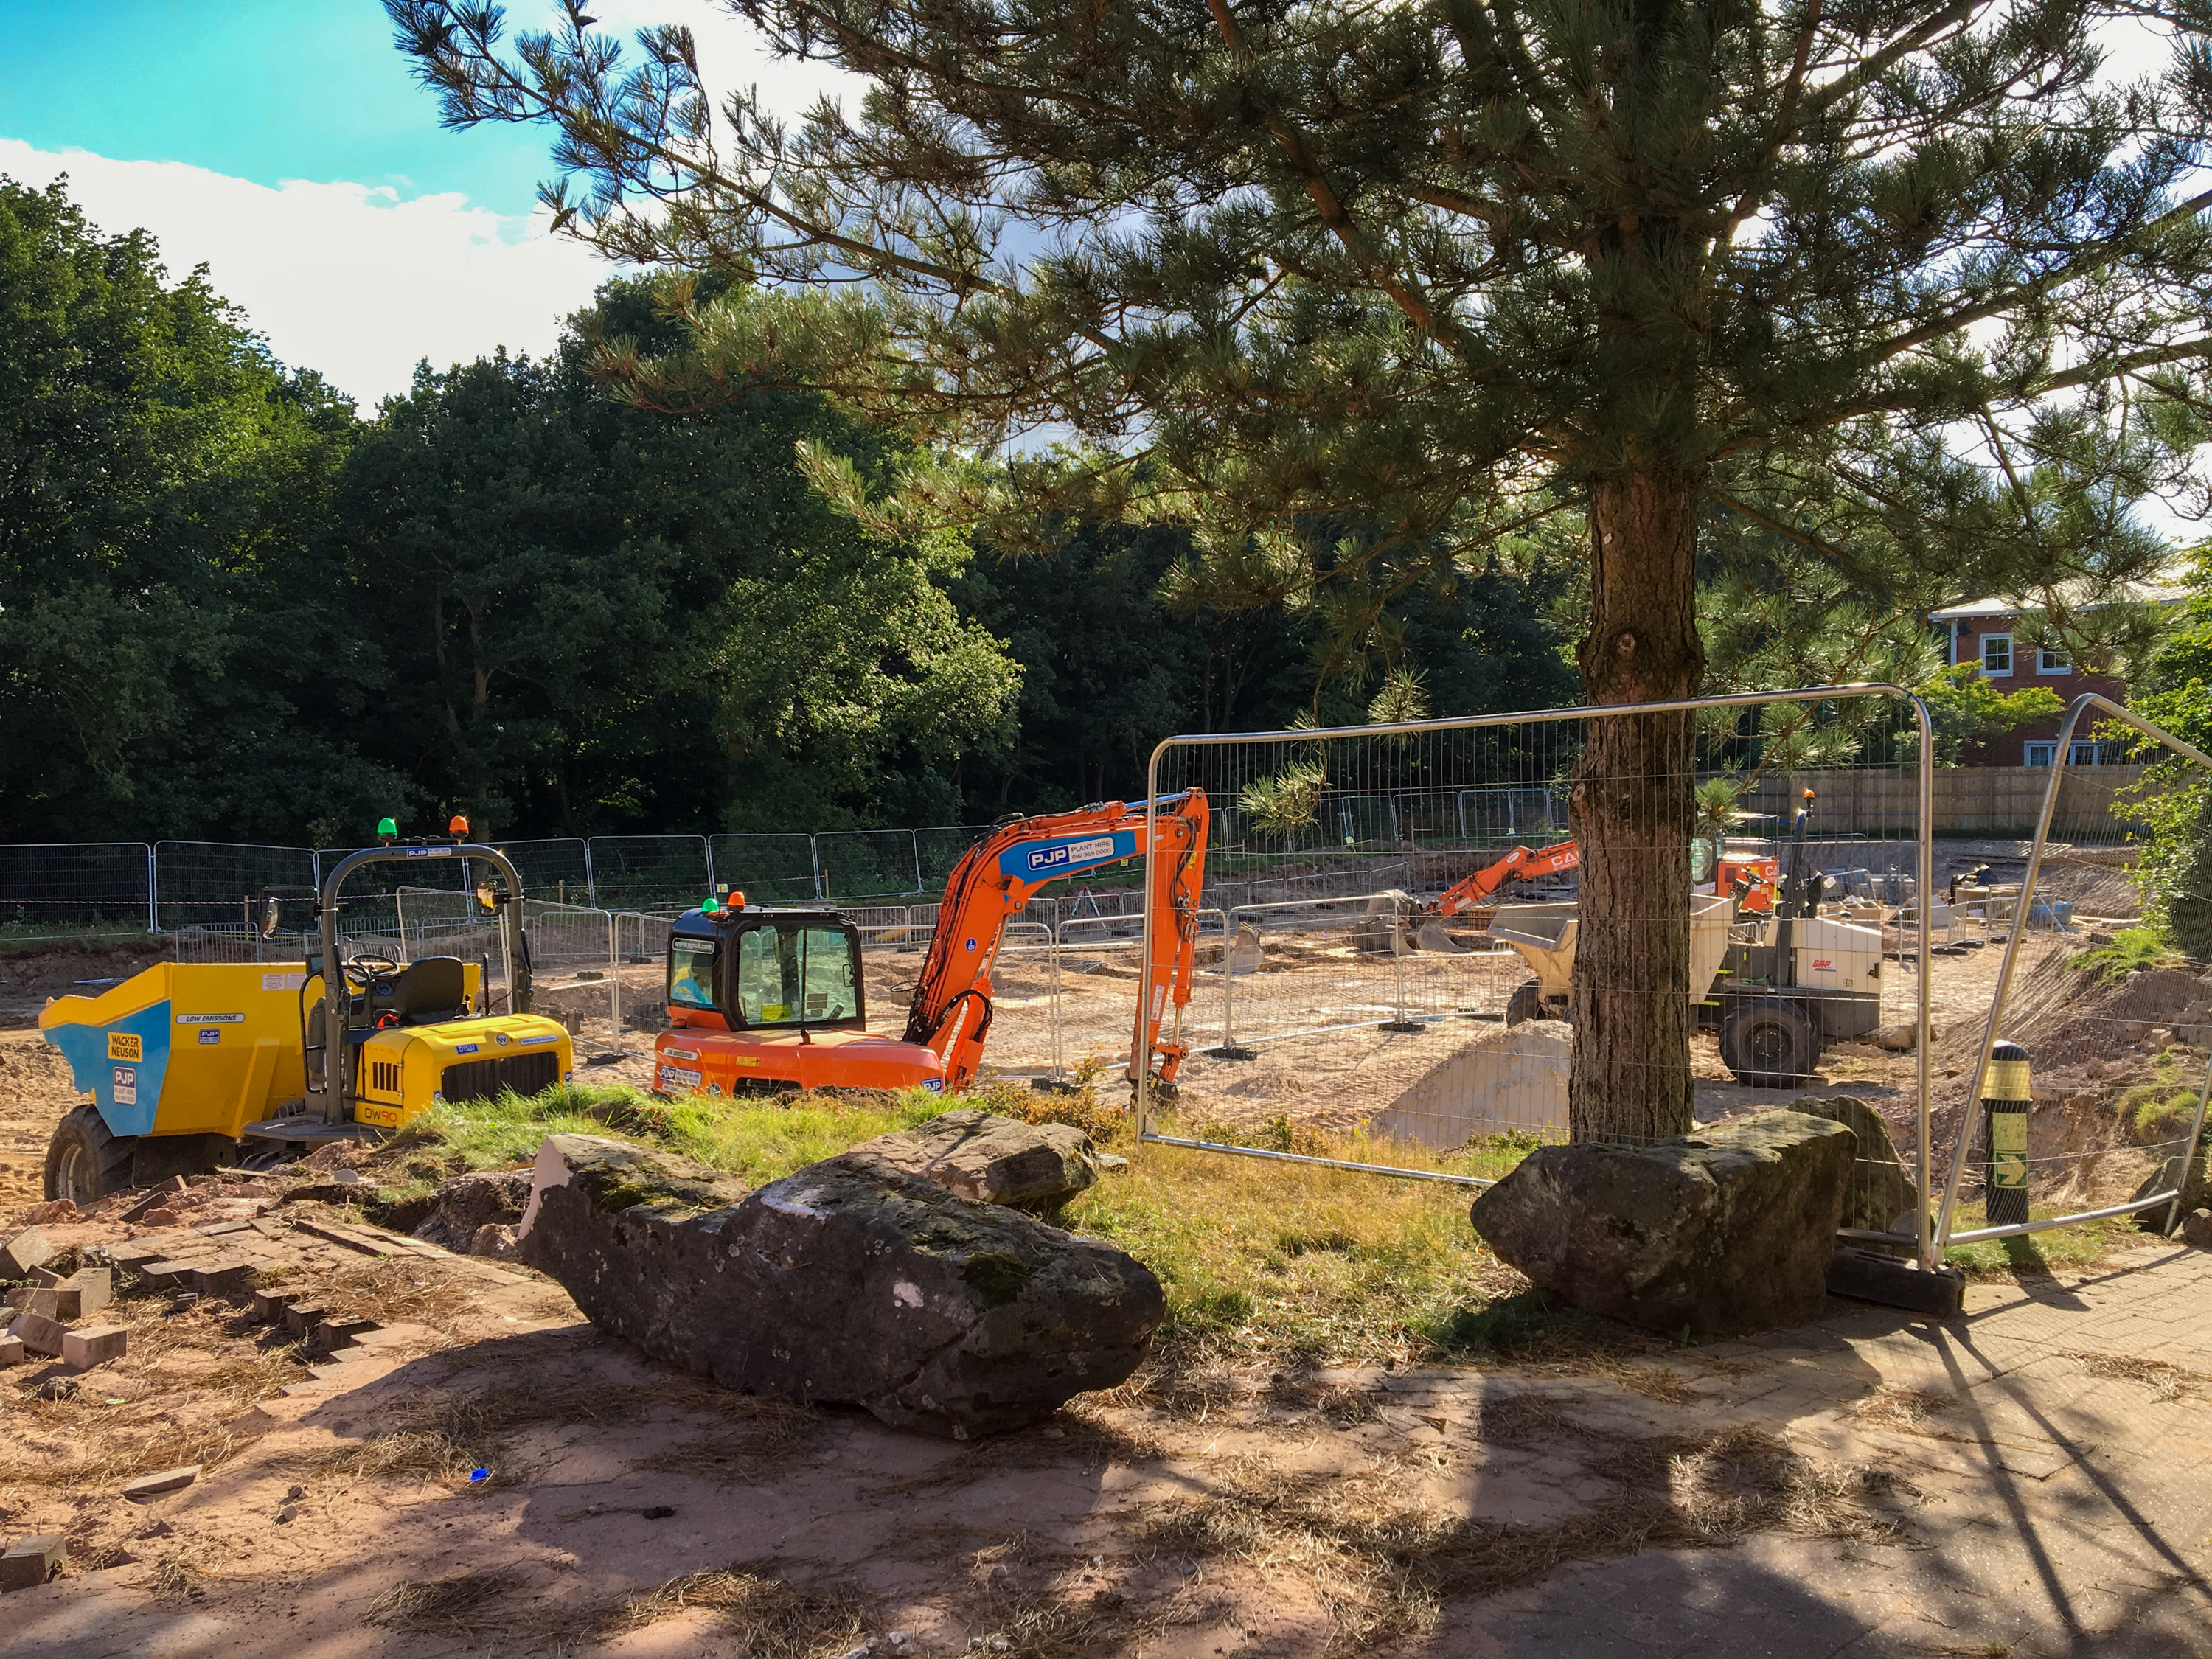 Site Clearing Begins For Alton Towers Hotel Extension